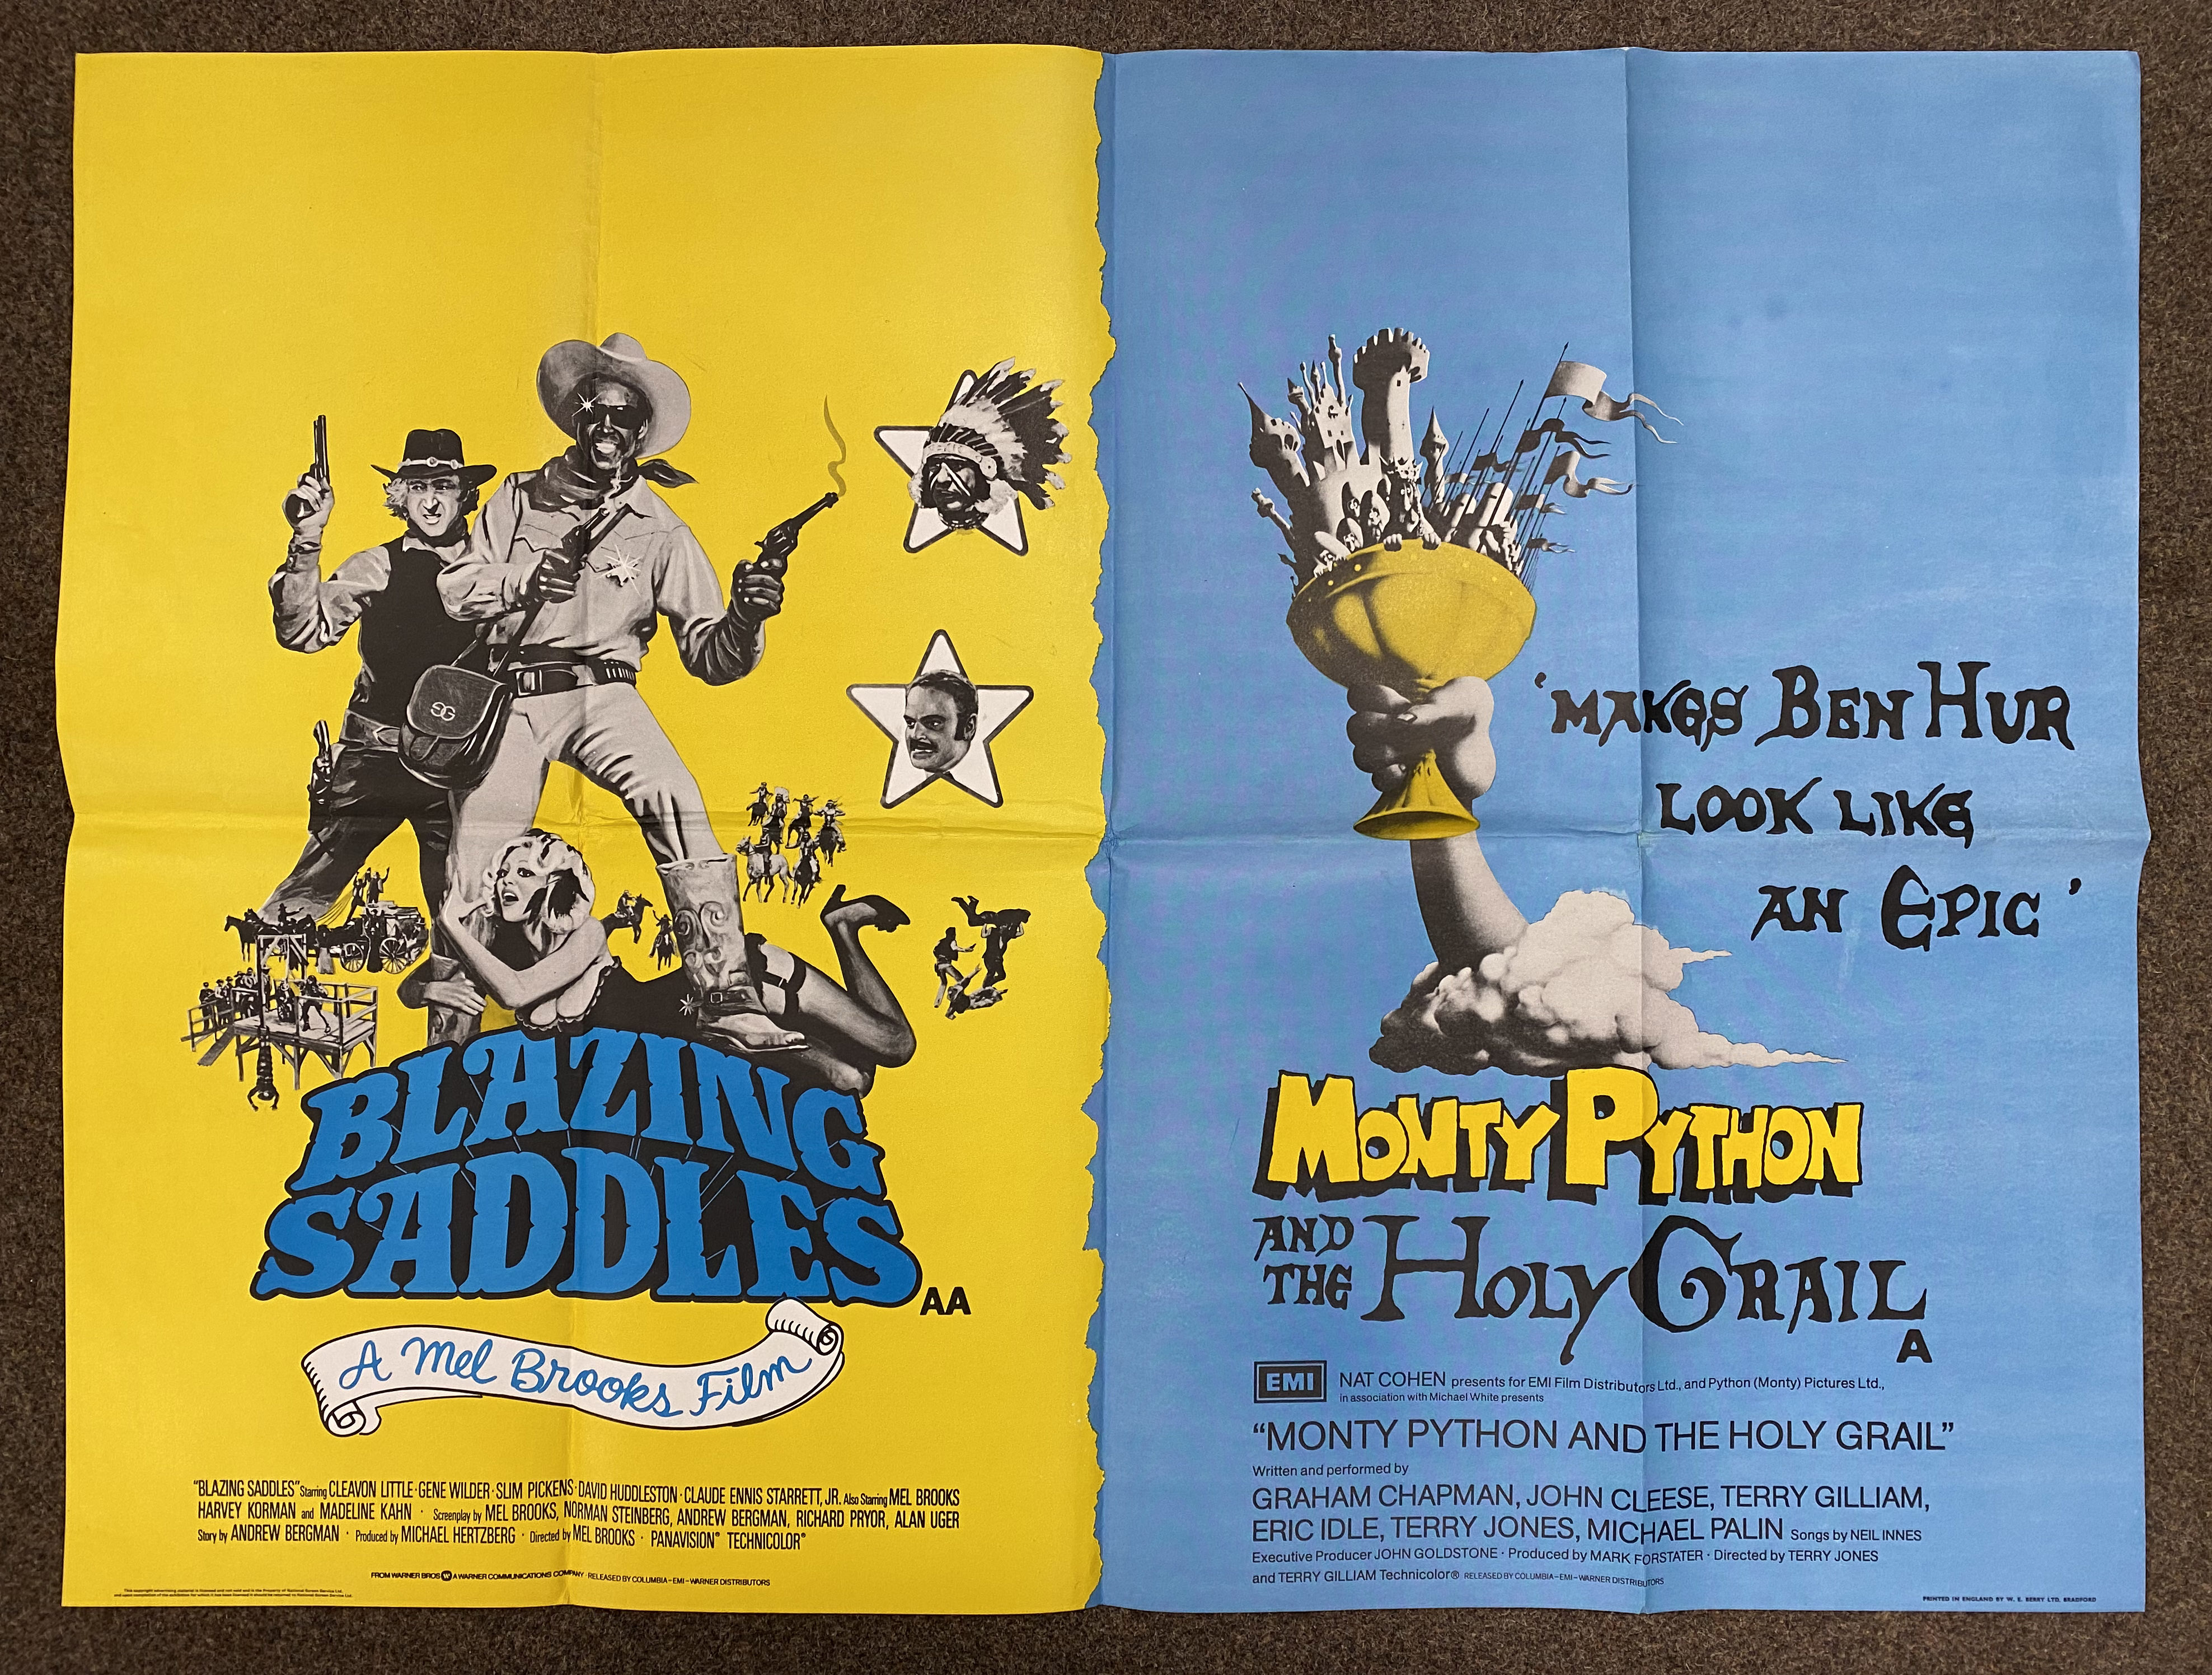 Blazing Saddles and Monty Python And The Holy Grail double-bill British Quad film poster, folded.